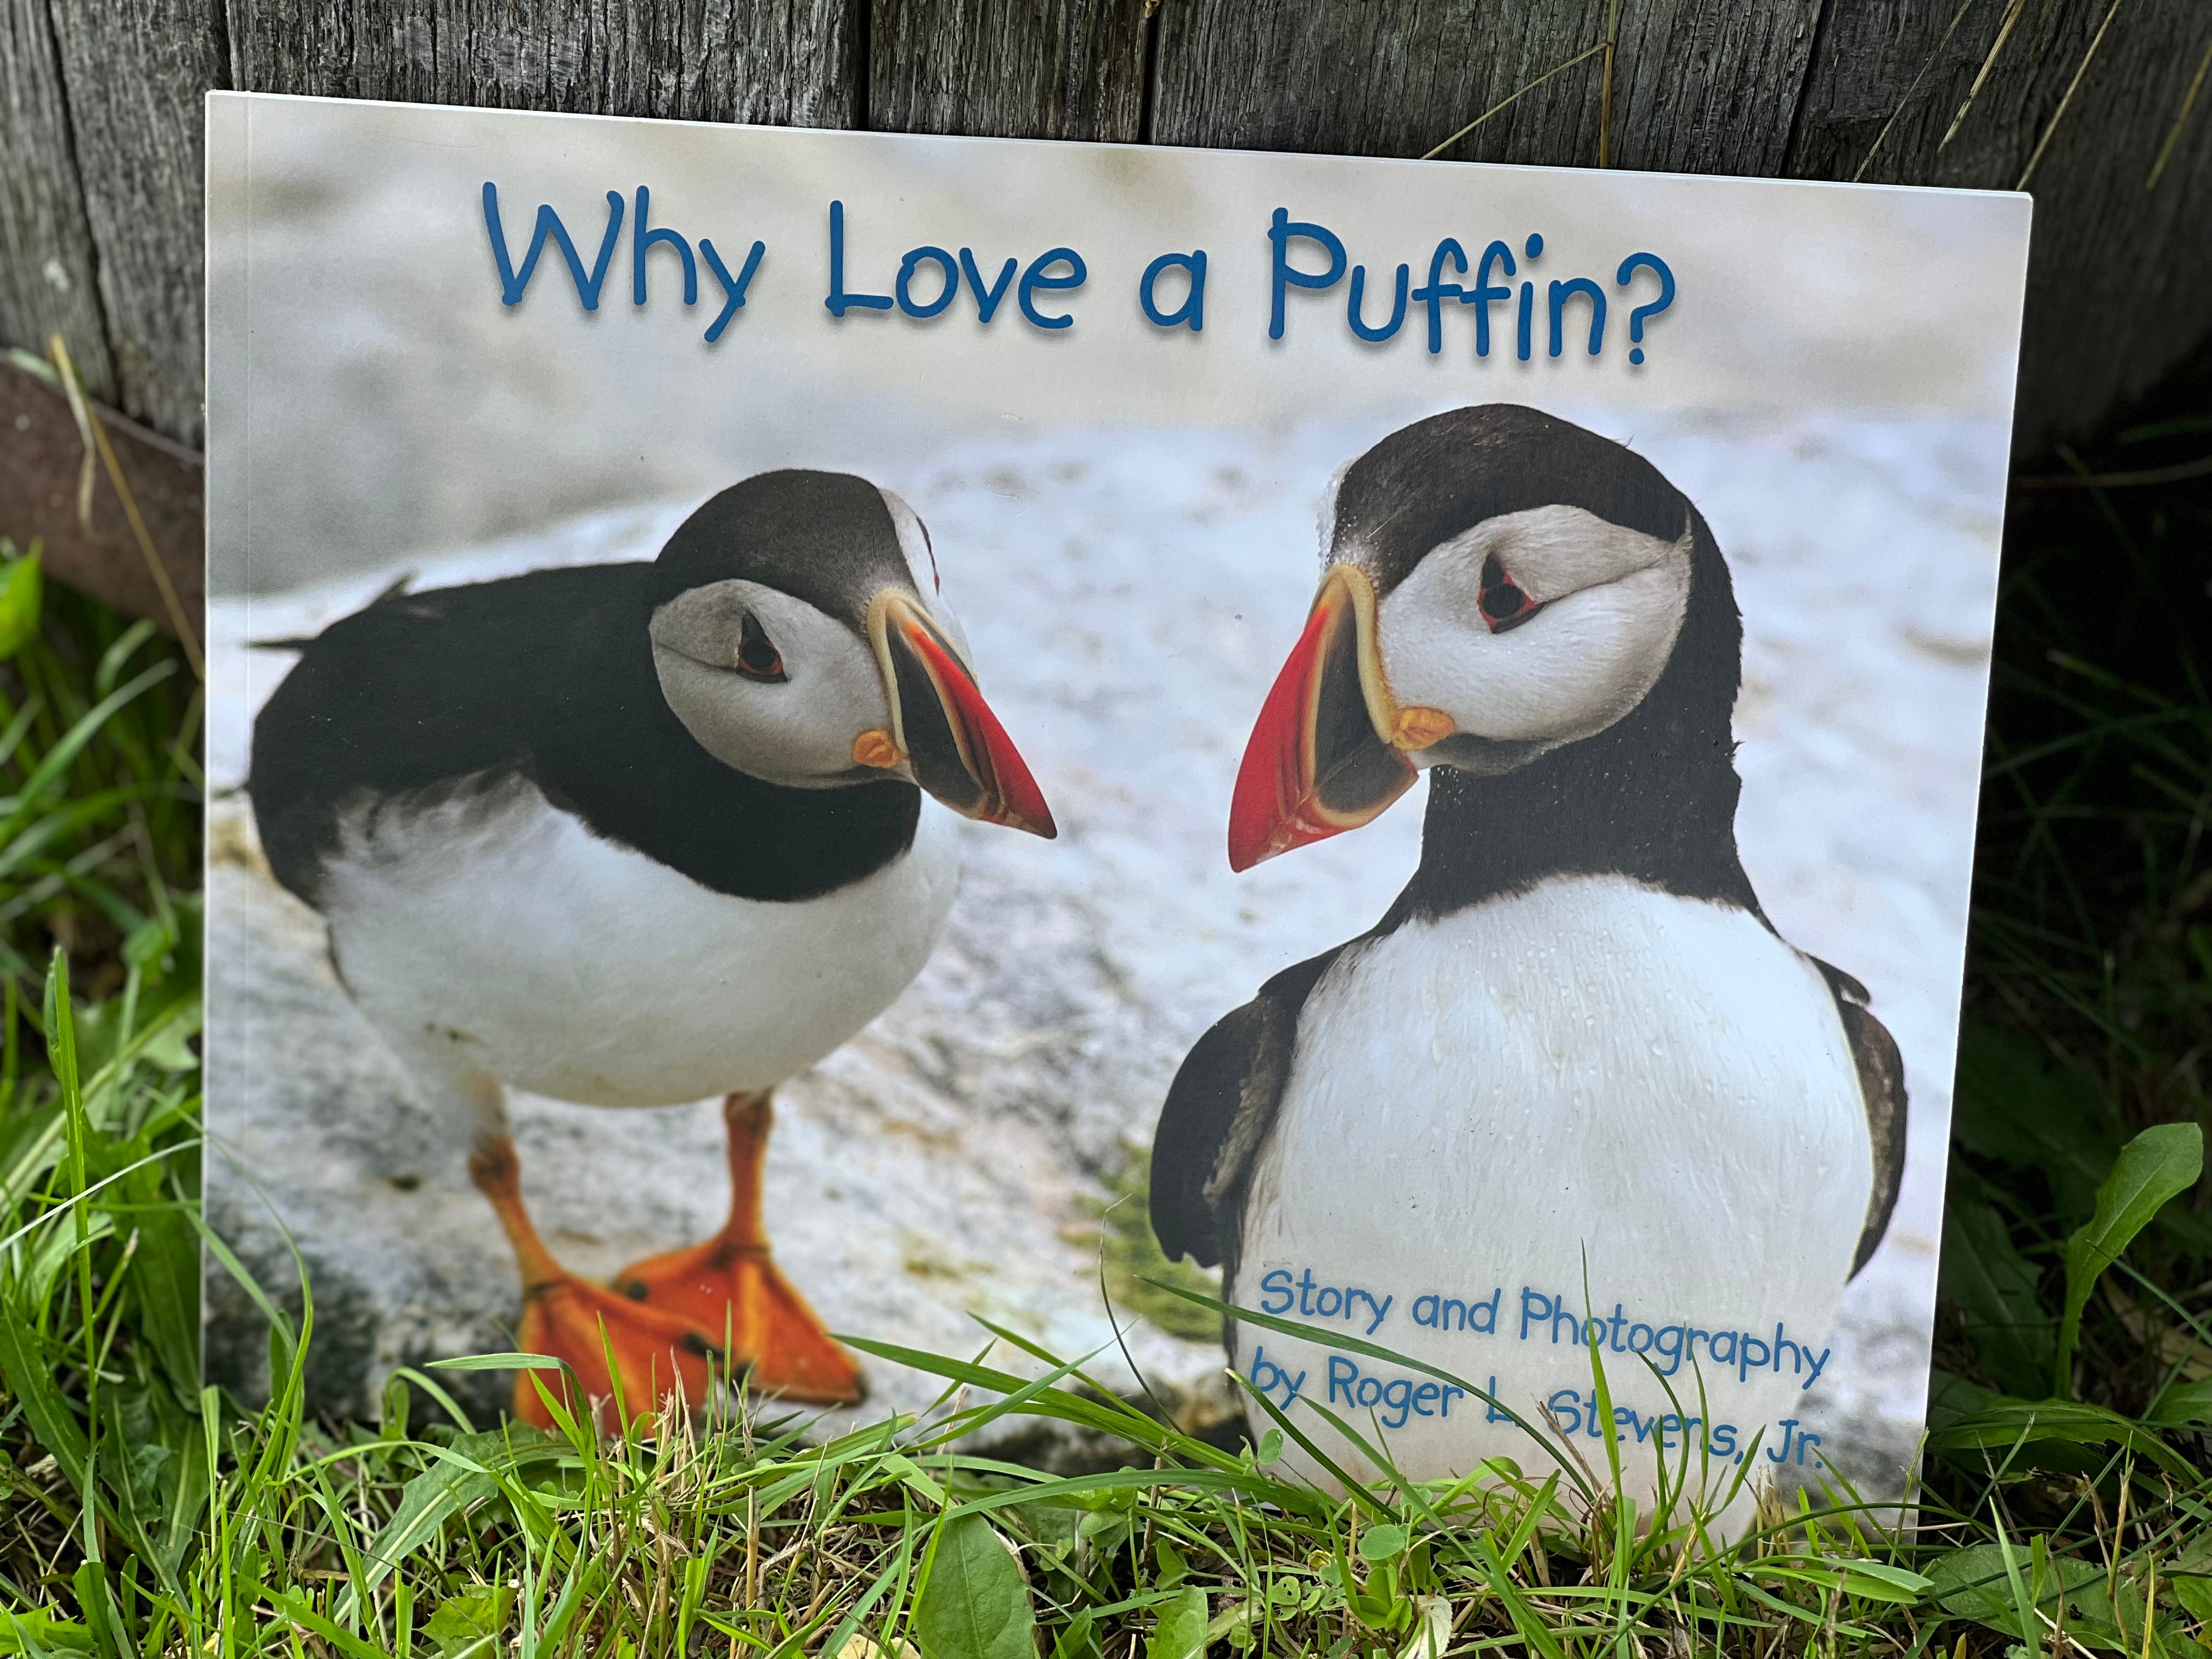 Maine Author WHY LOVE A PUFFIN by Roger L. Stevens